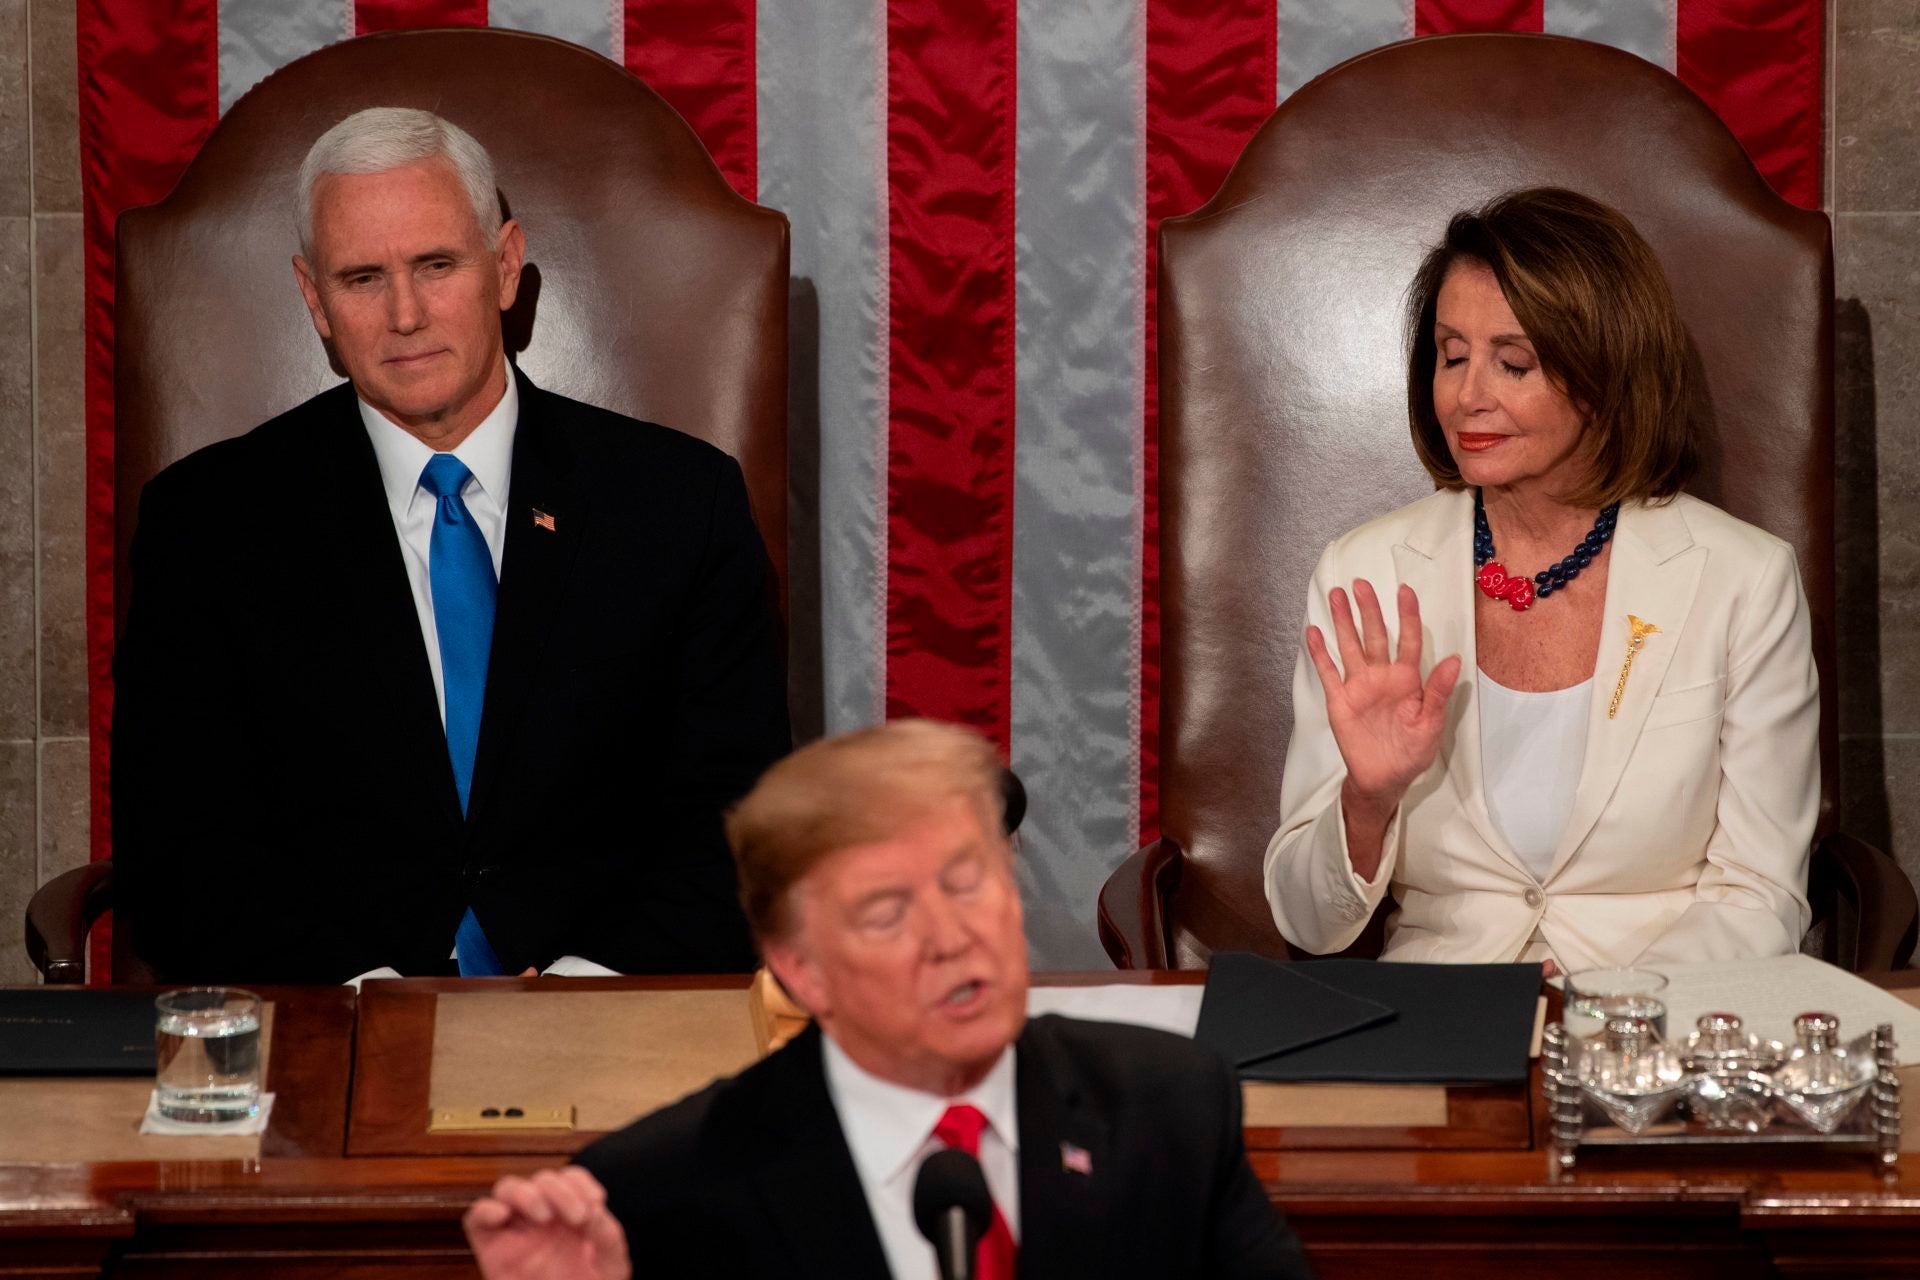 Trump Talks Bipartisanship, Criminal Justice And, Of Course, The Border Wall During State Of The Union